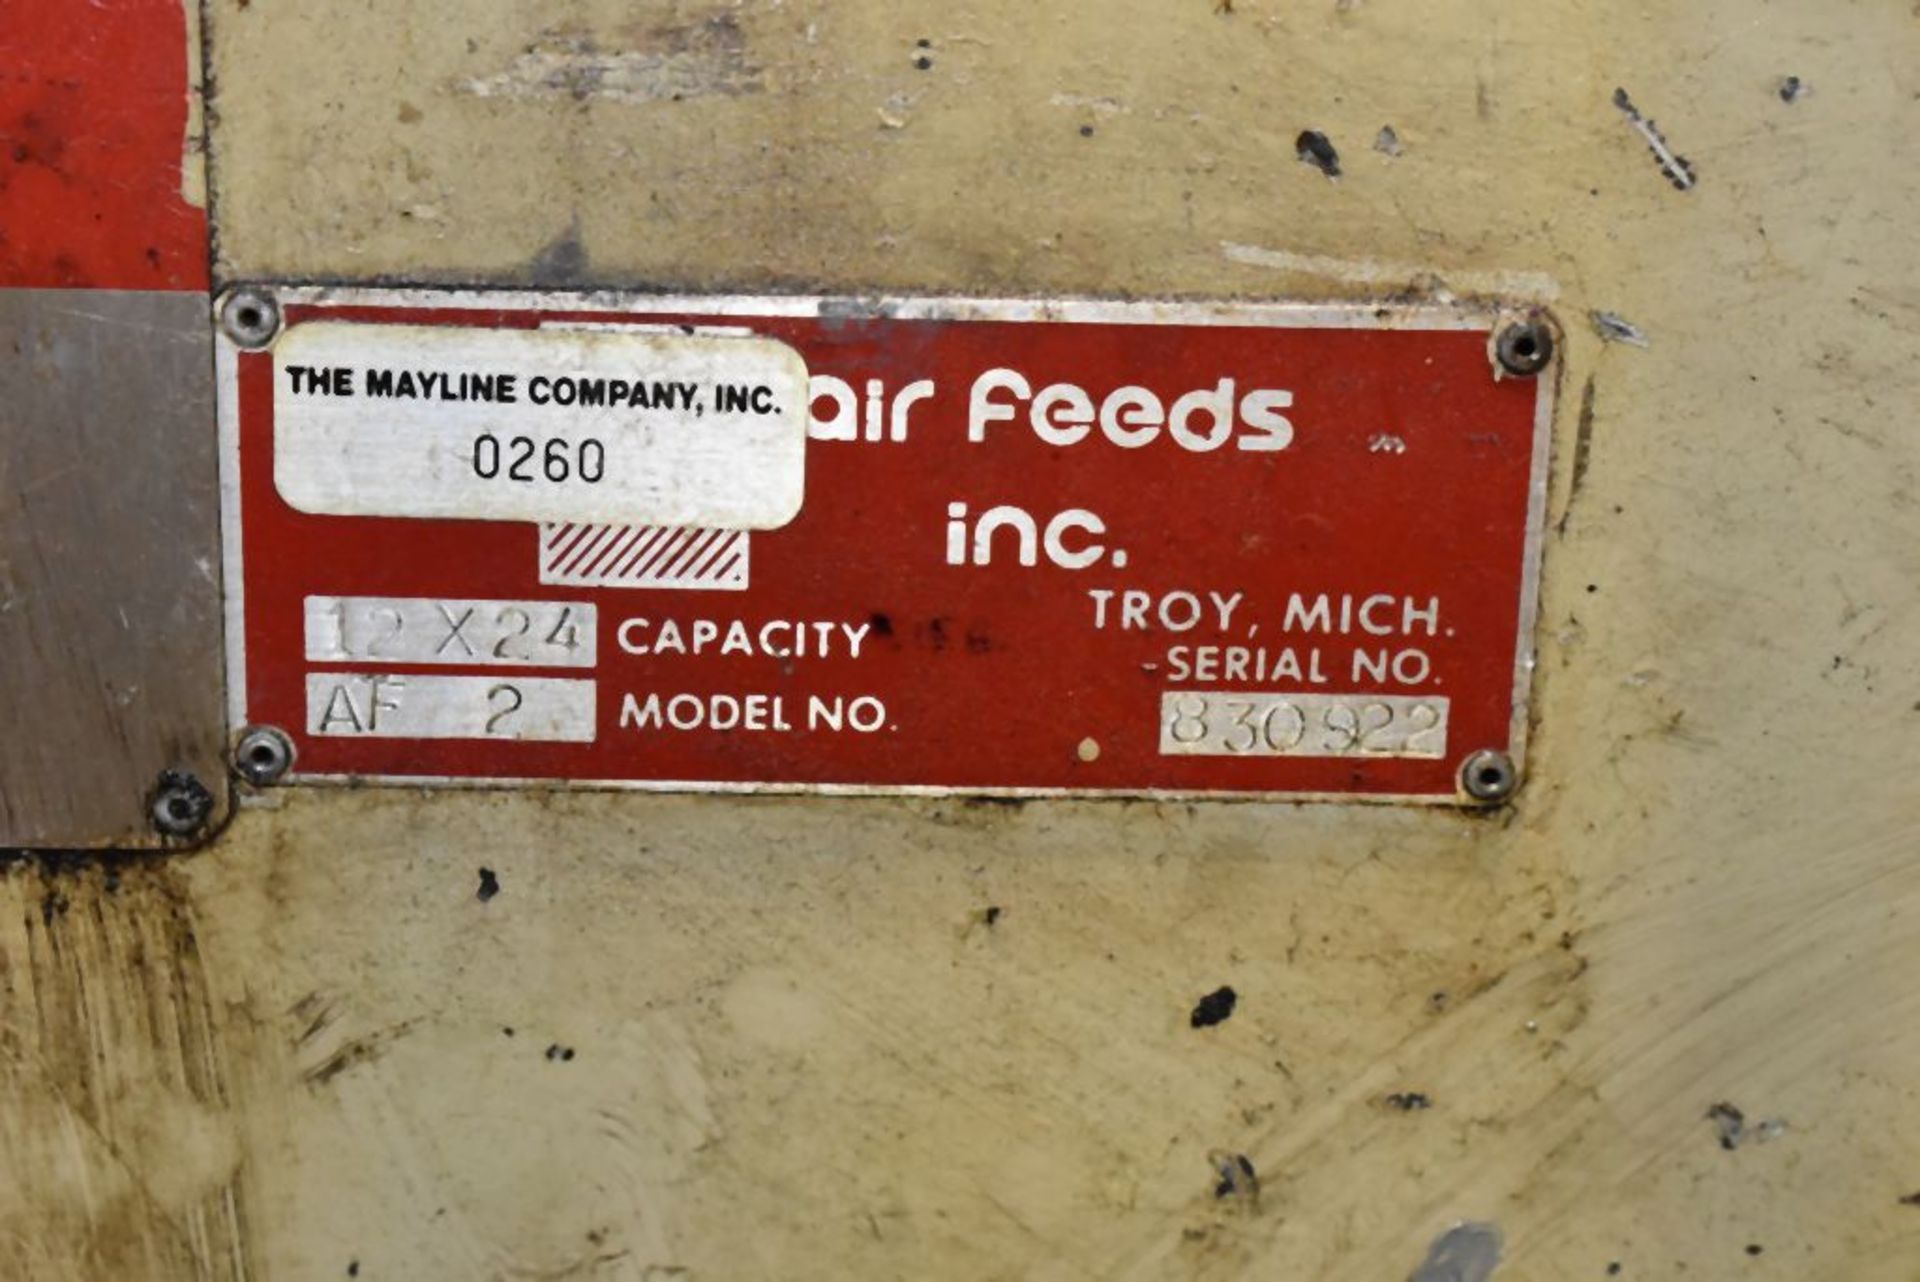 AIRFEED Hf2 AIR FEED, S/N: 830922, 12" x 24" CAPACITY RIGHT TO LEFT - Image 4 of 4